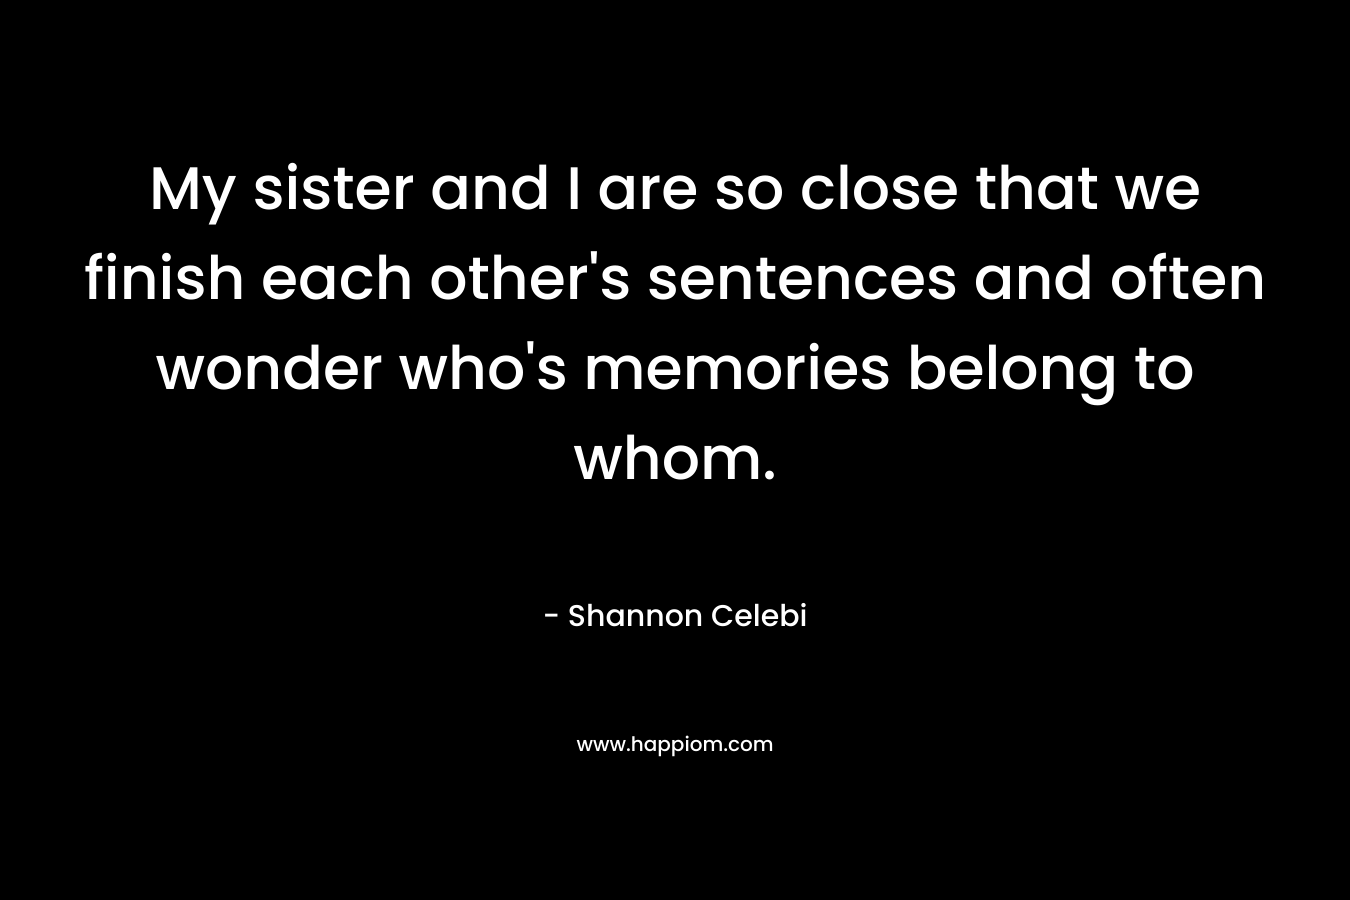 My sister and I are so close that we finish each other’s sentences and often wonder who’s memories belong to whom. – Shannon Celebi